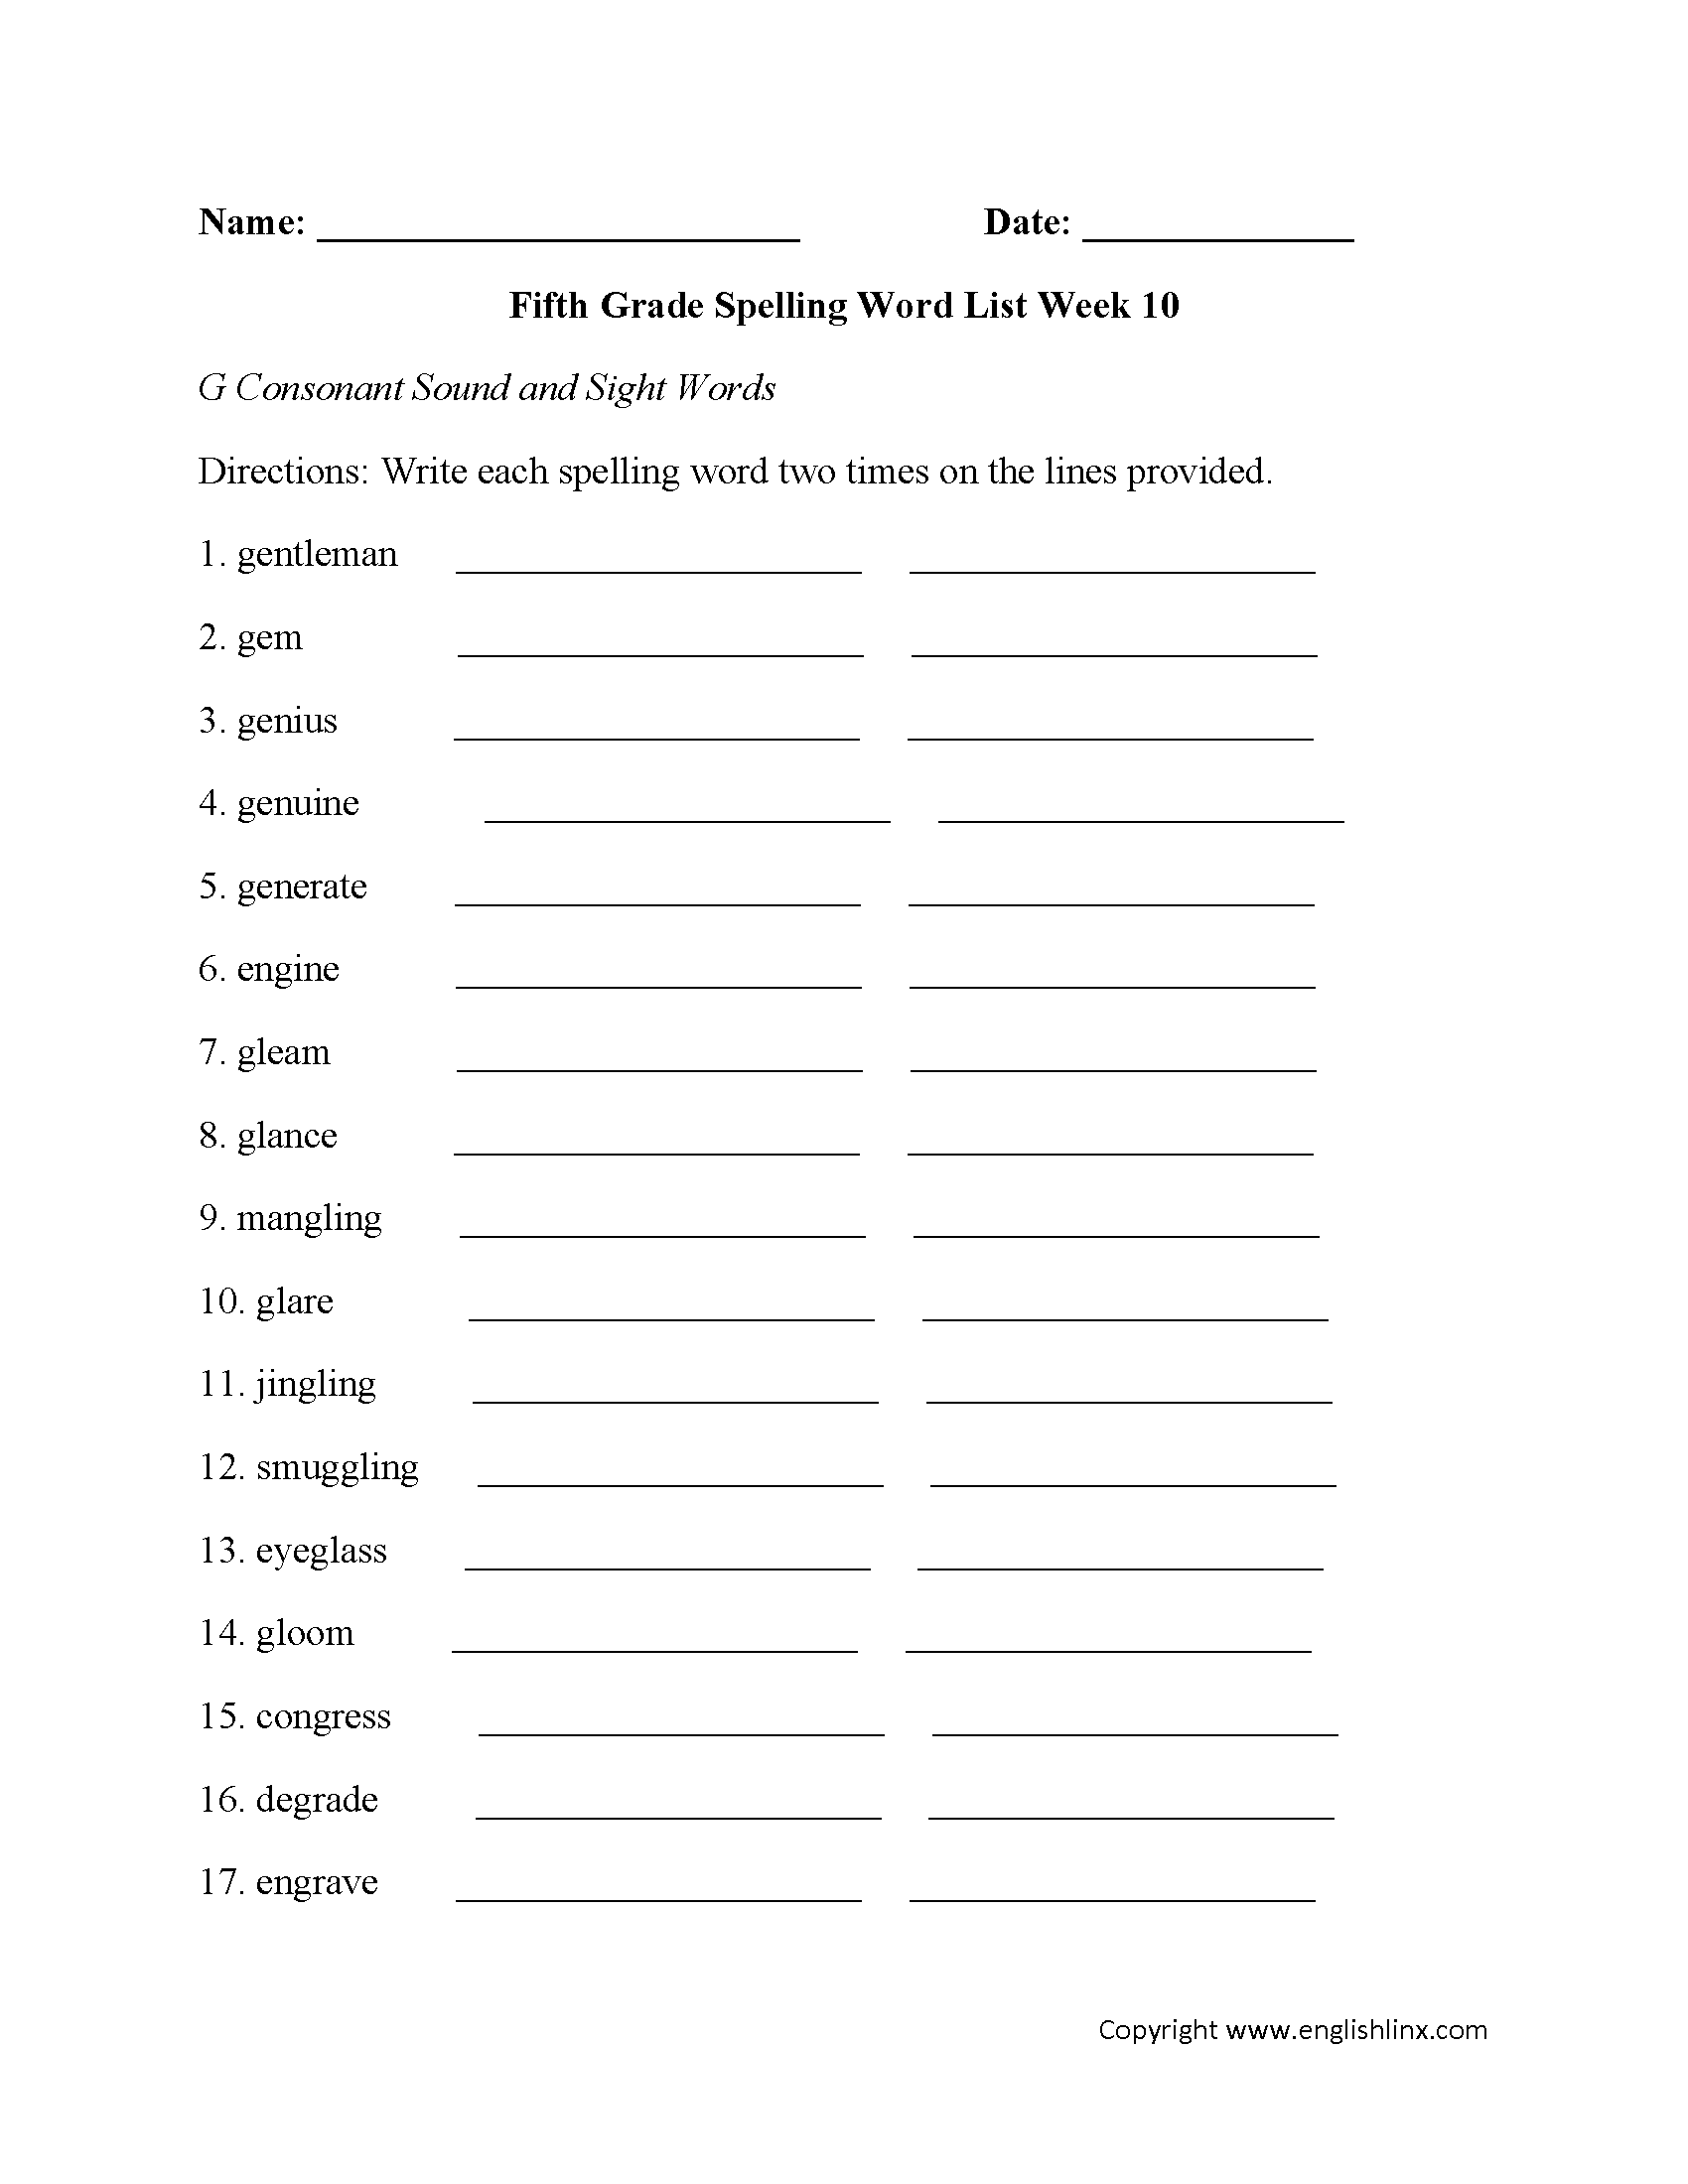 Week 10 G Consonant and Sight Words Fifth Grade Spelling Words Worksheets